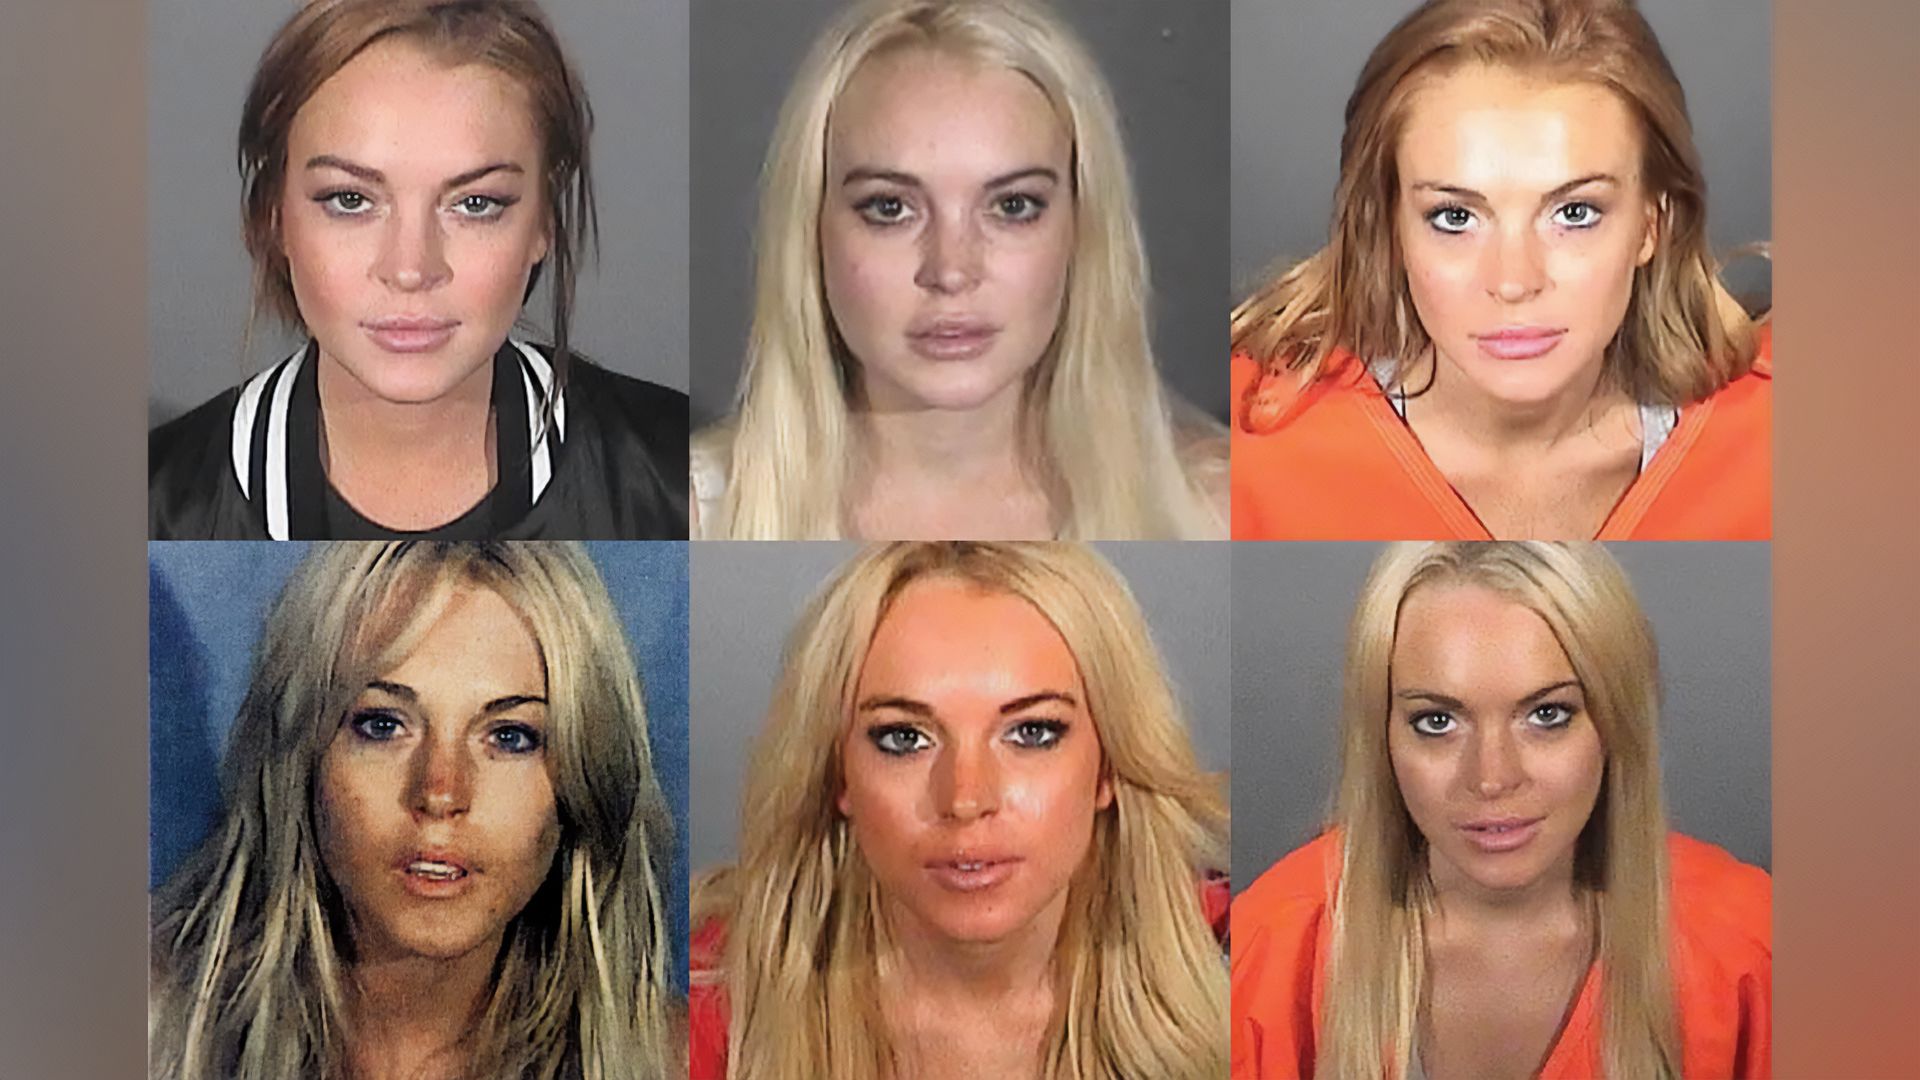 Lindsay Lohan and the police: the eternal relationship